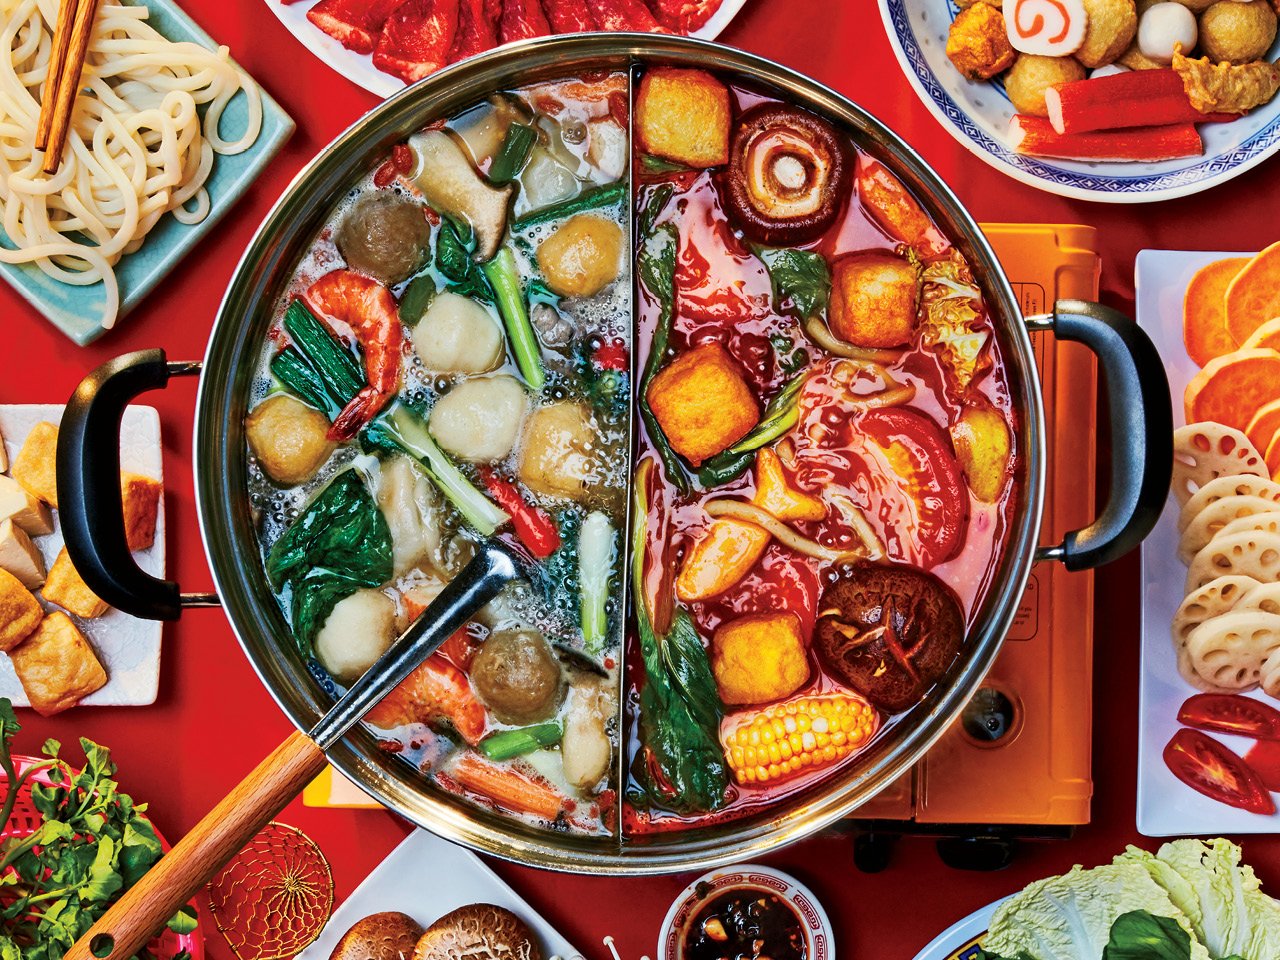 While hot pot restaurants across Canada have had to put things on pause, th...